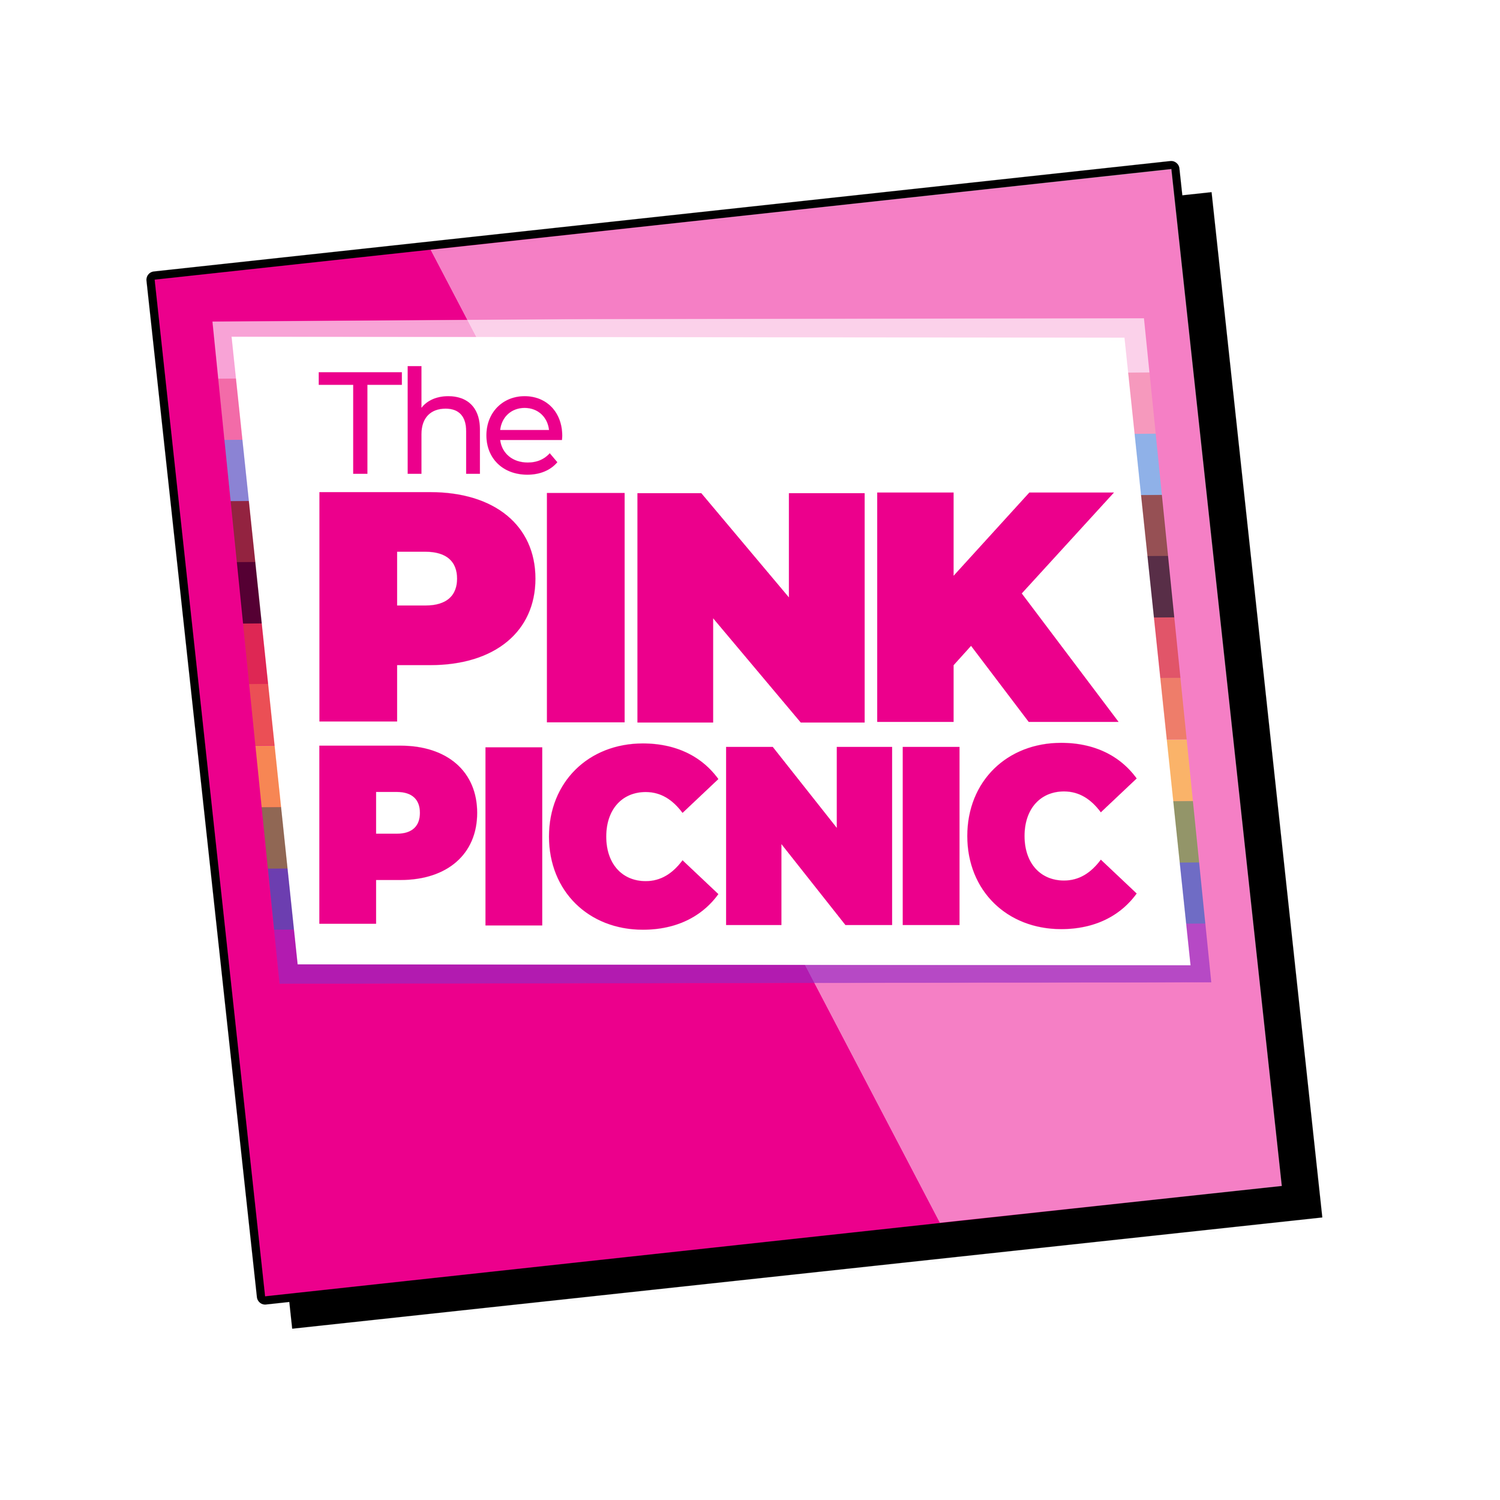 The Pink Picnic